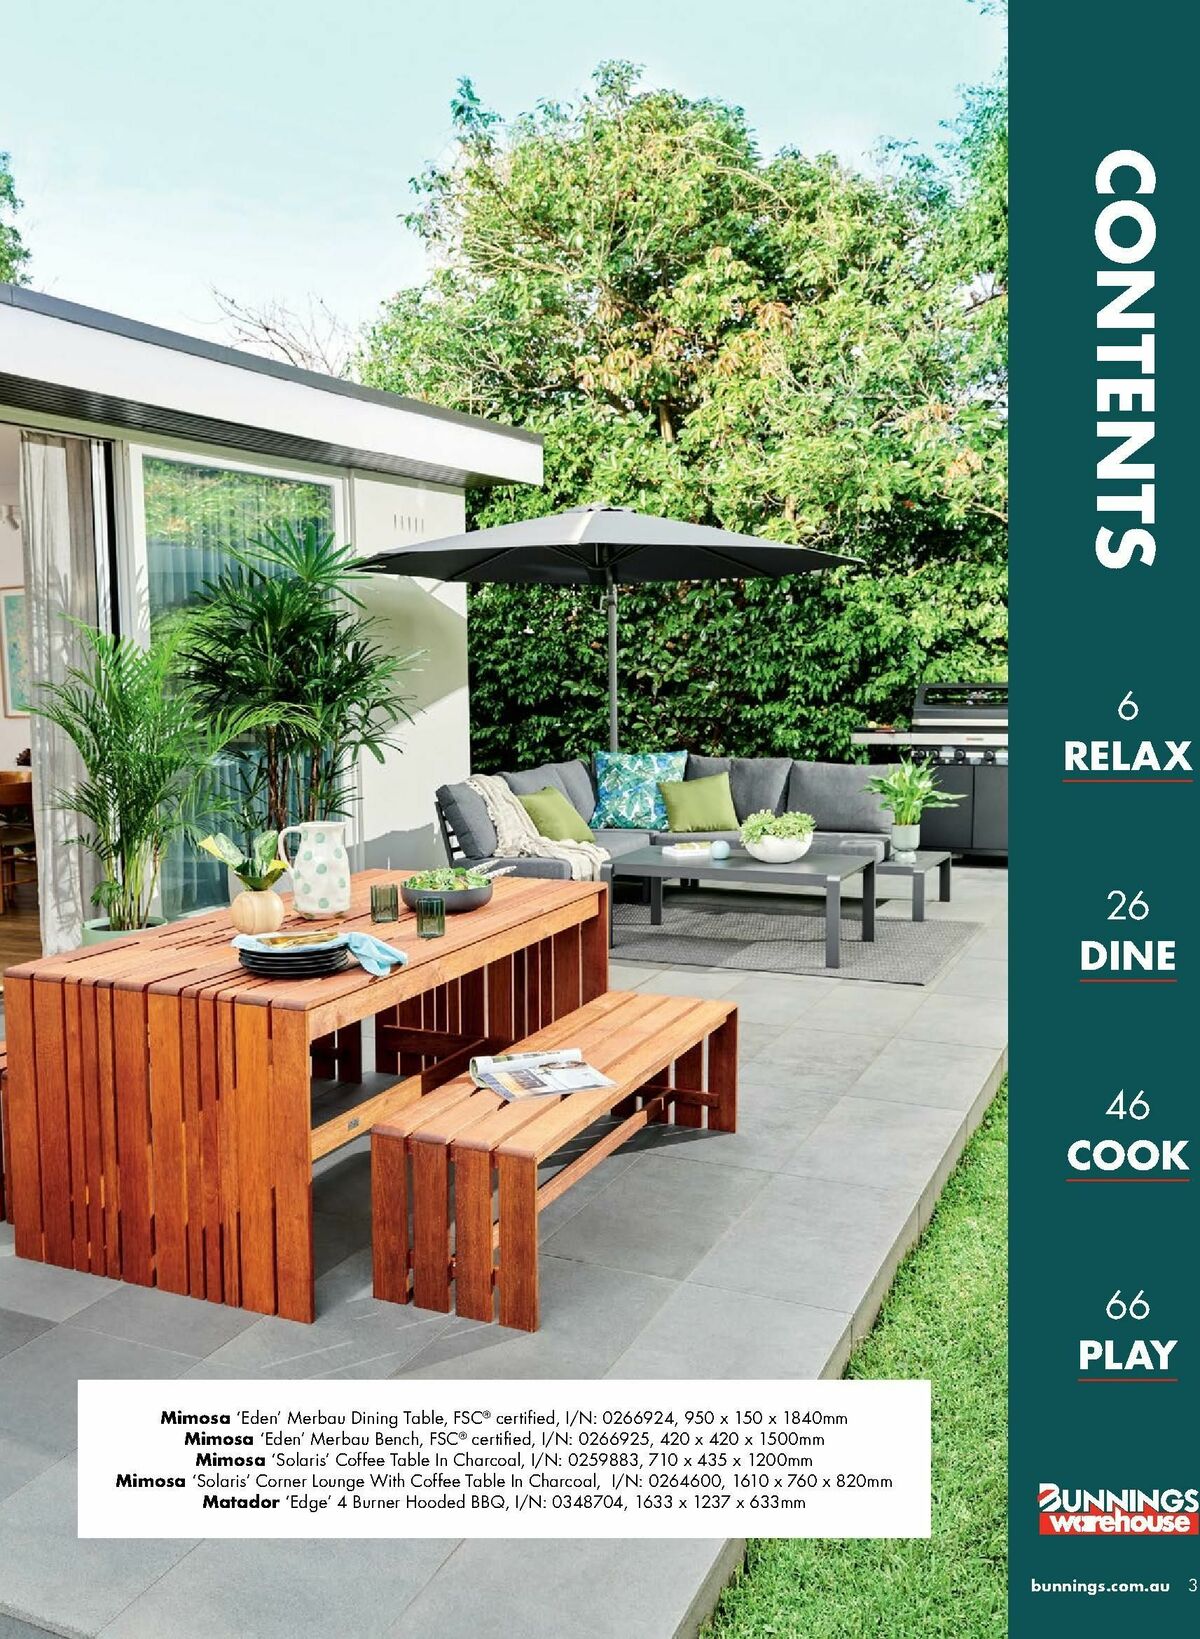 Bunnings Warehouse Outdoor Living Range Catalogues from 7 September